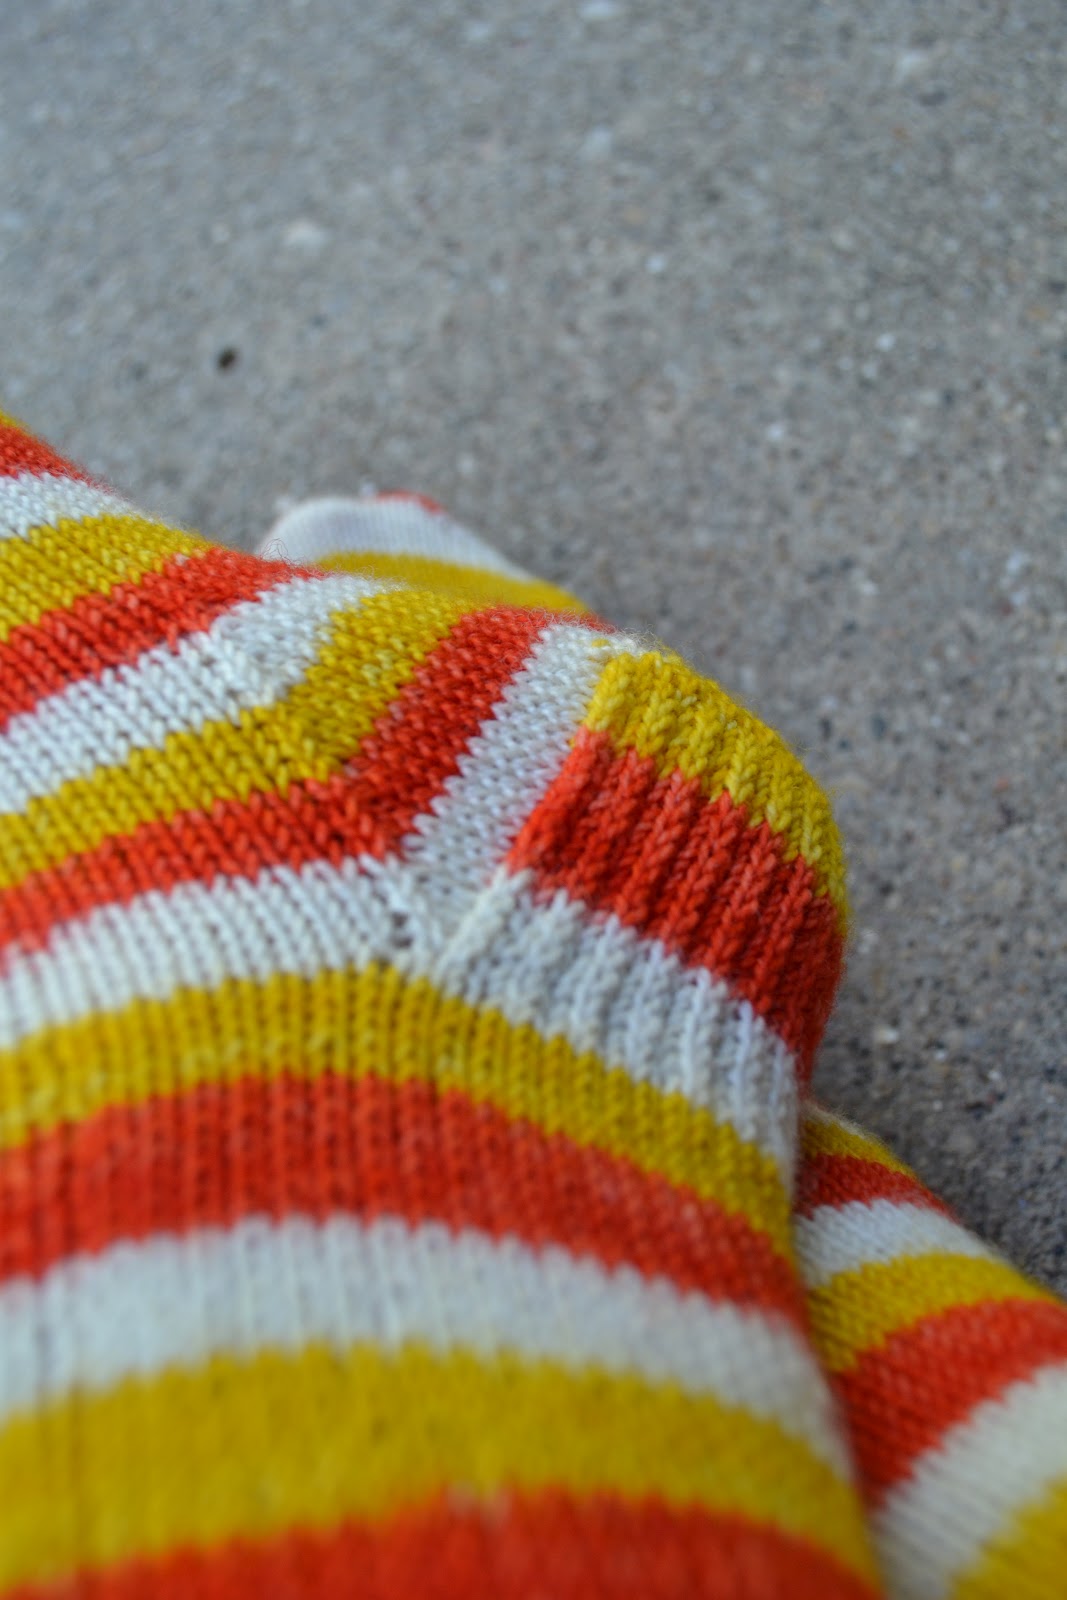 Susan B. Anderson: Candy Corn Socks and My Hope